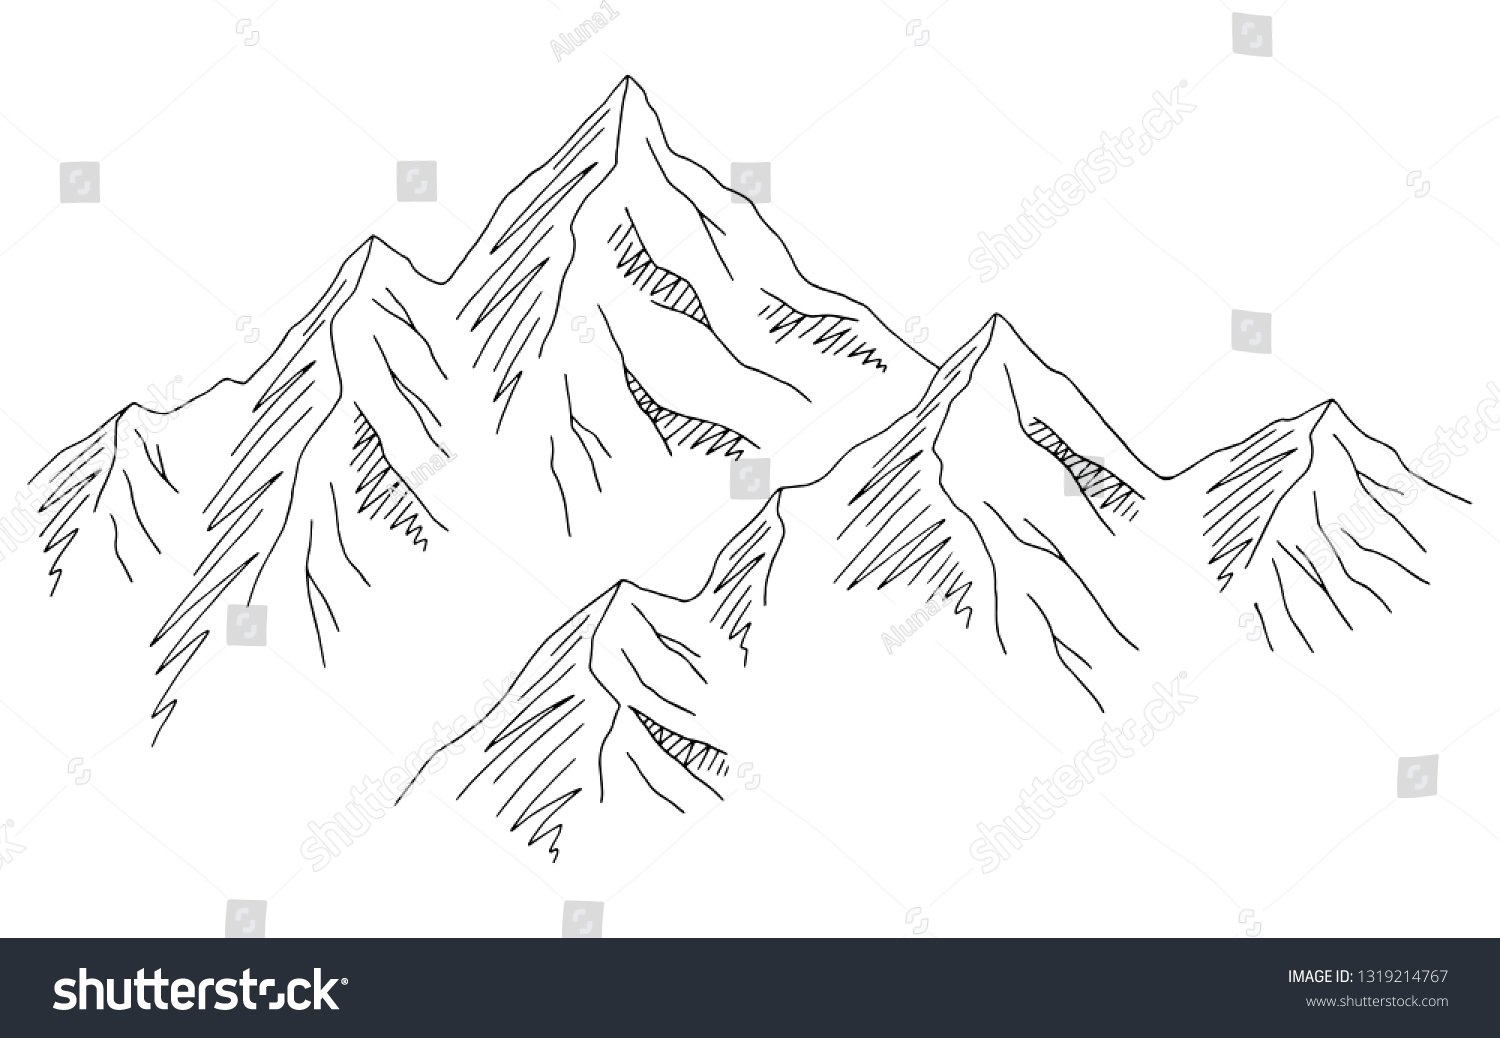 Mountains Graphic Black White Landscape Sketch Stock Vector (Royalty ...